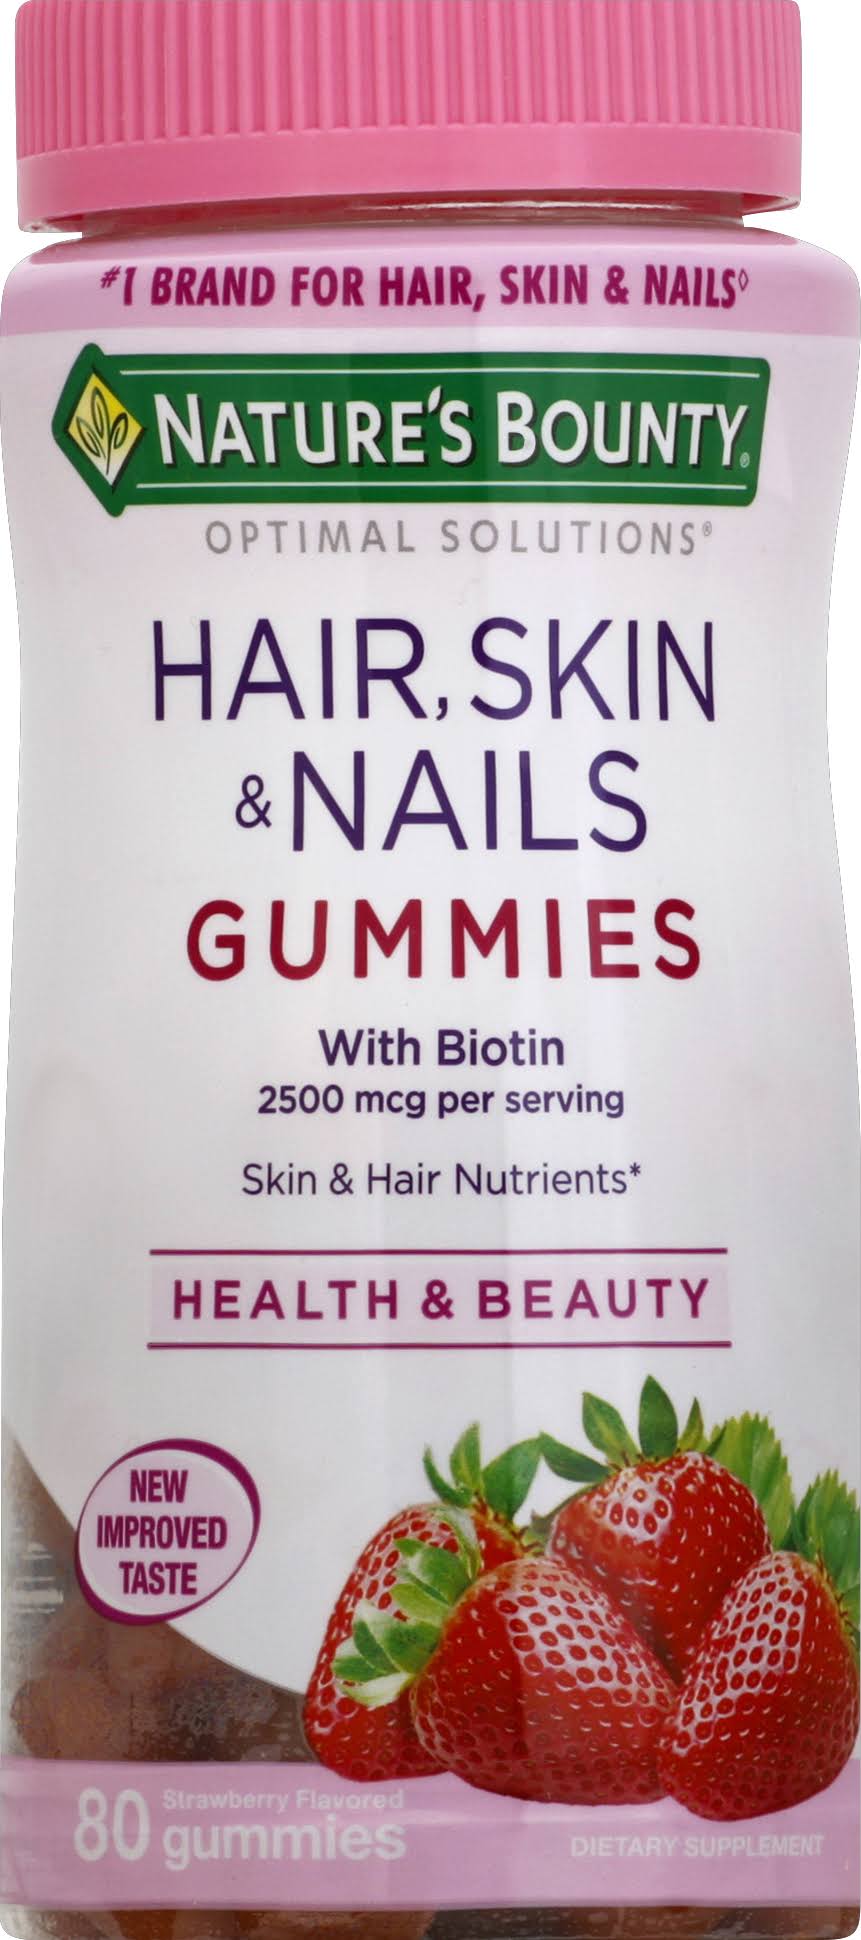 Nature's Bounty Optimal Solutions Hair, Skin and Nails Gummies - 80 Count